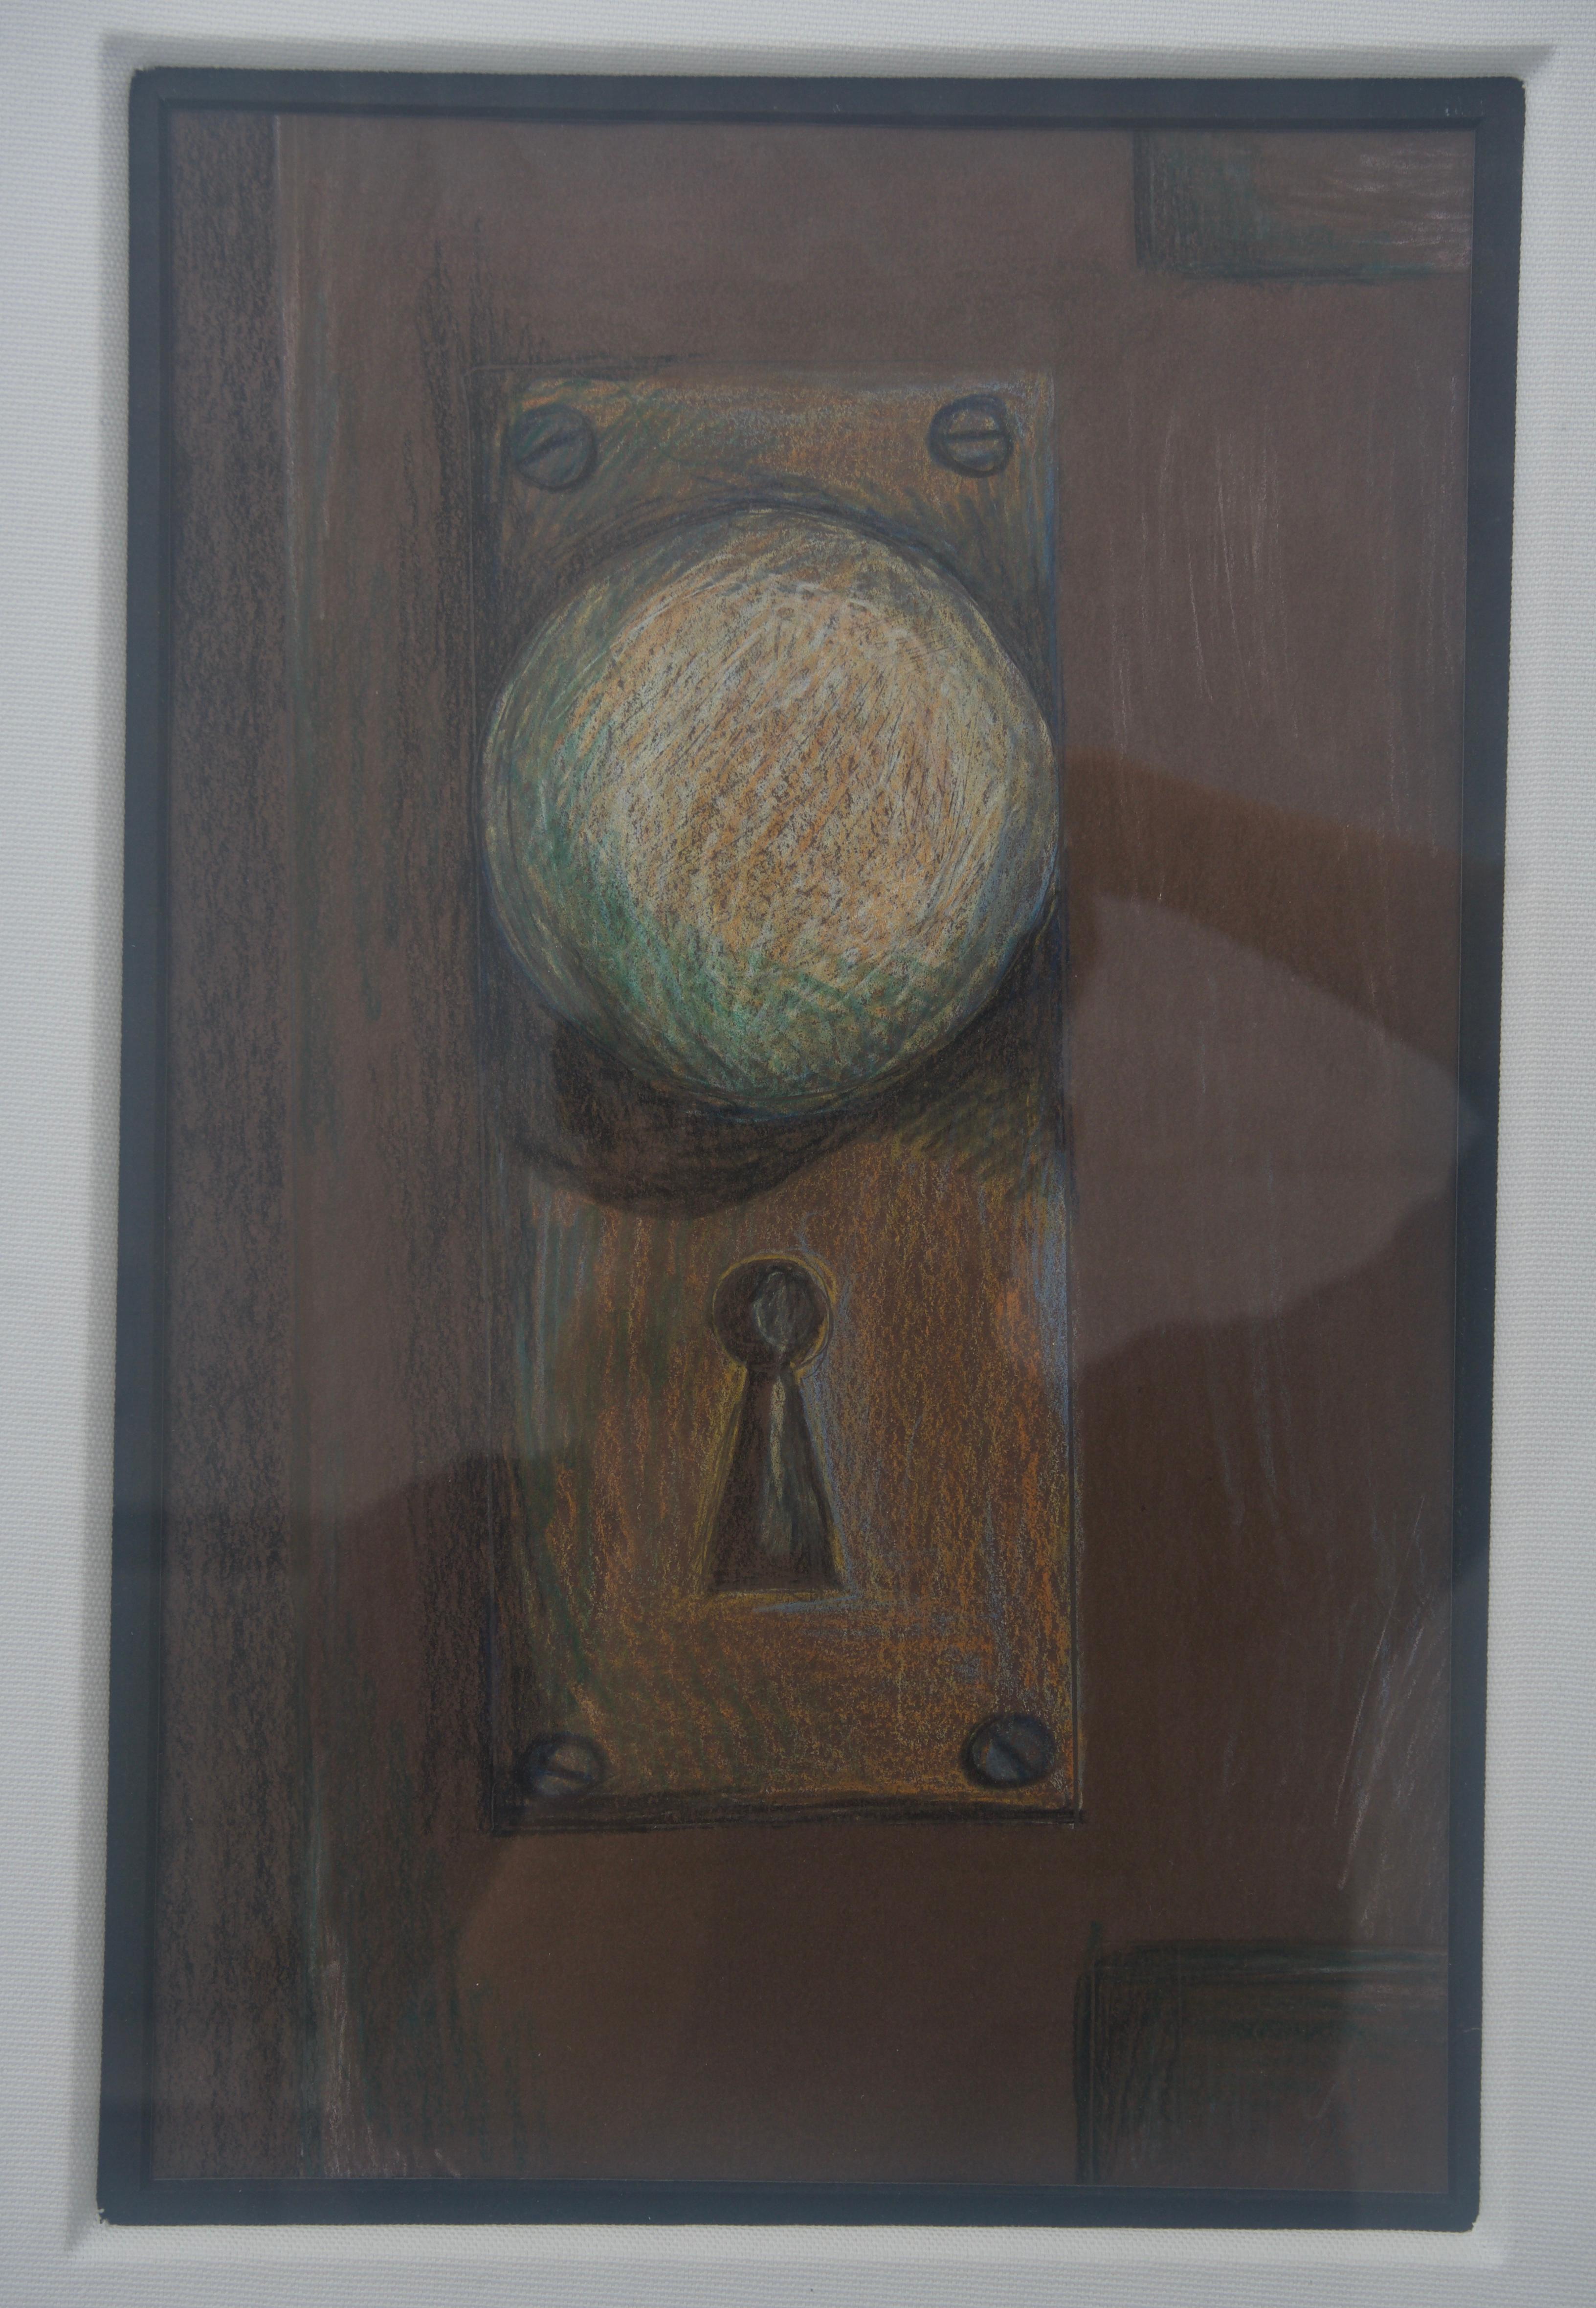 American Drawing of Antique Doorknob For Sale